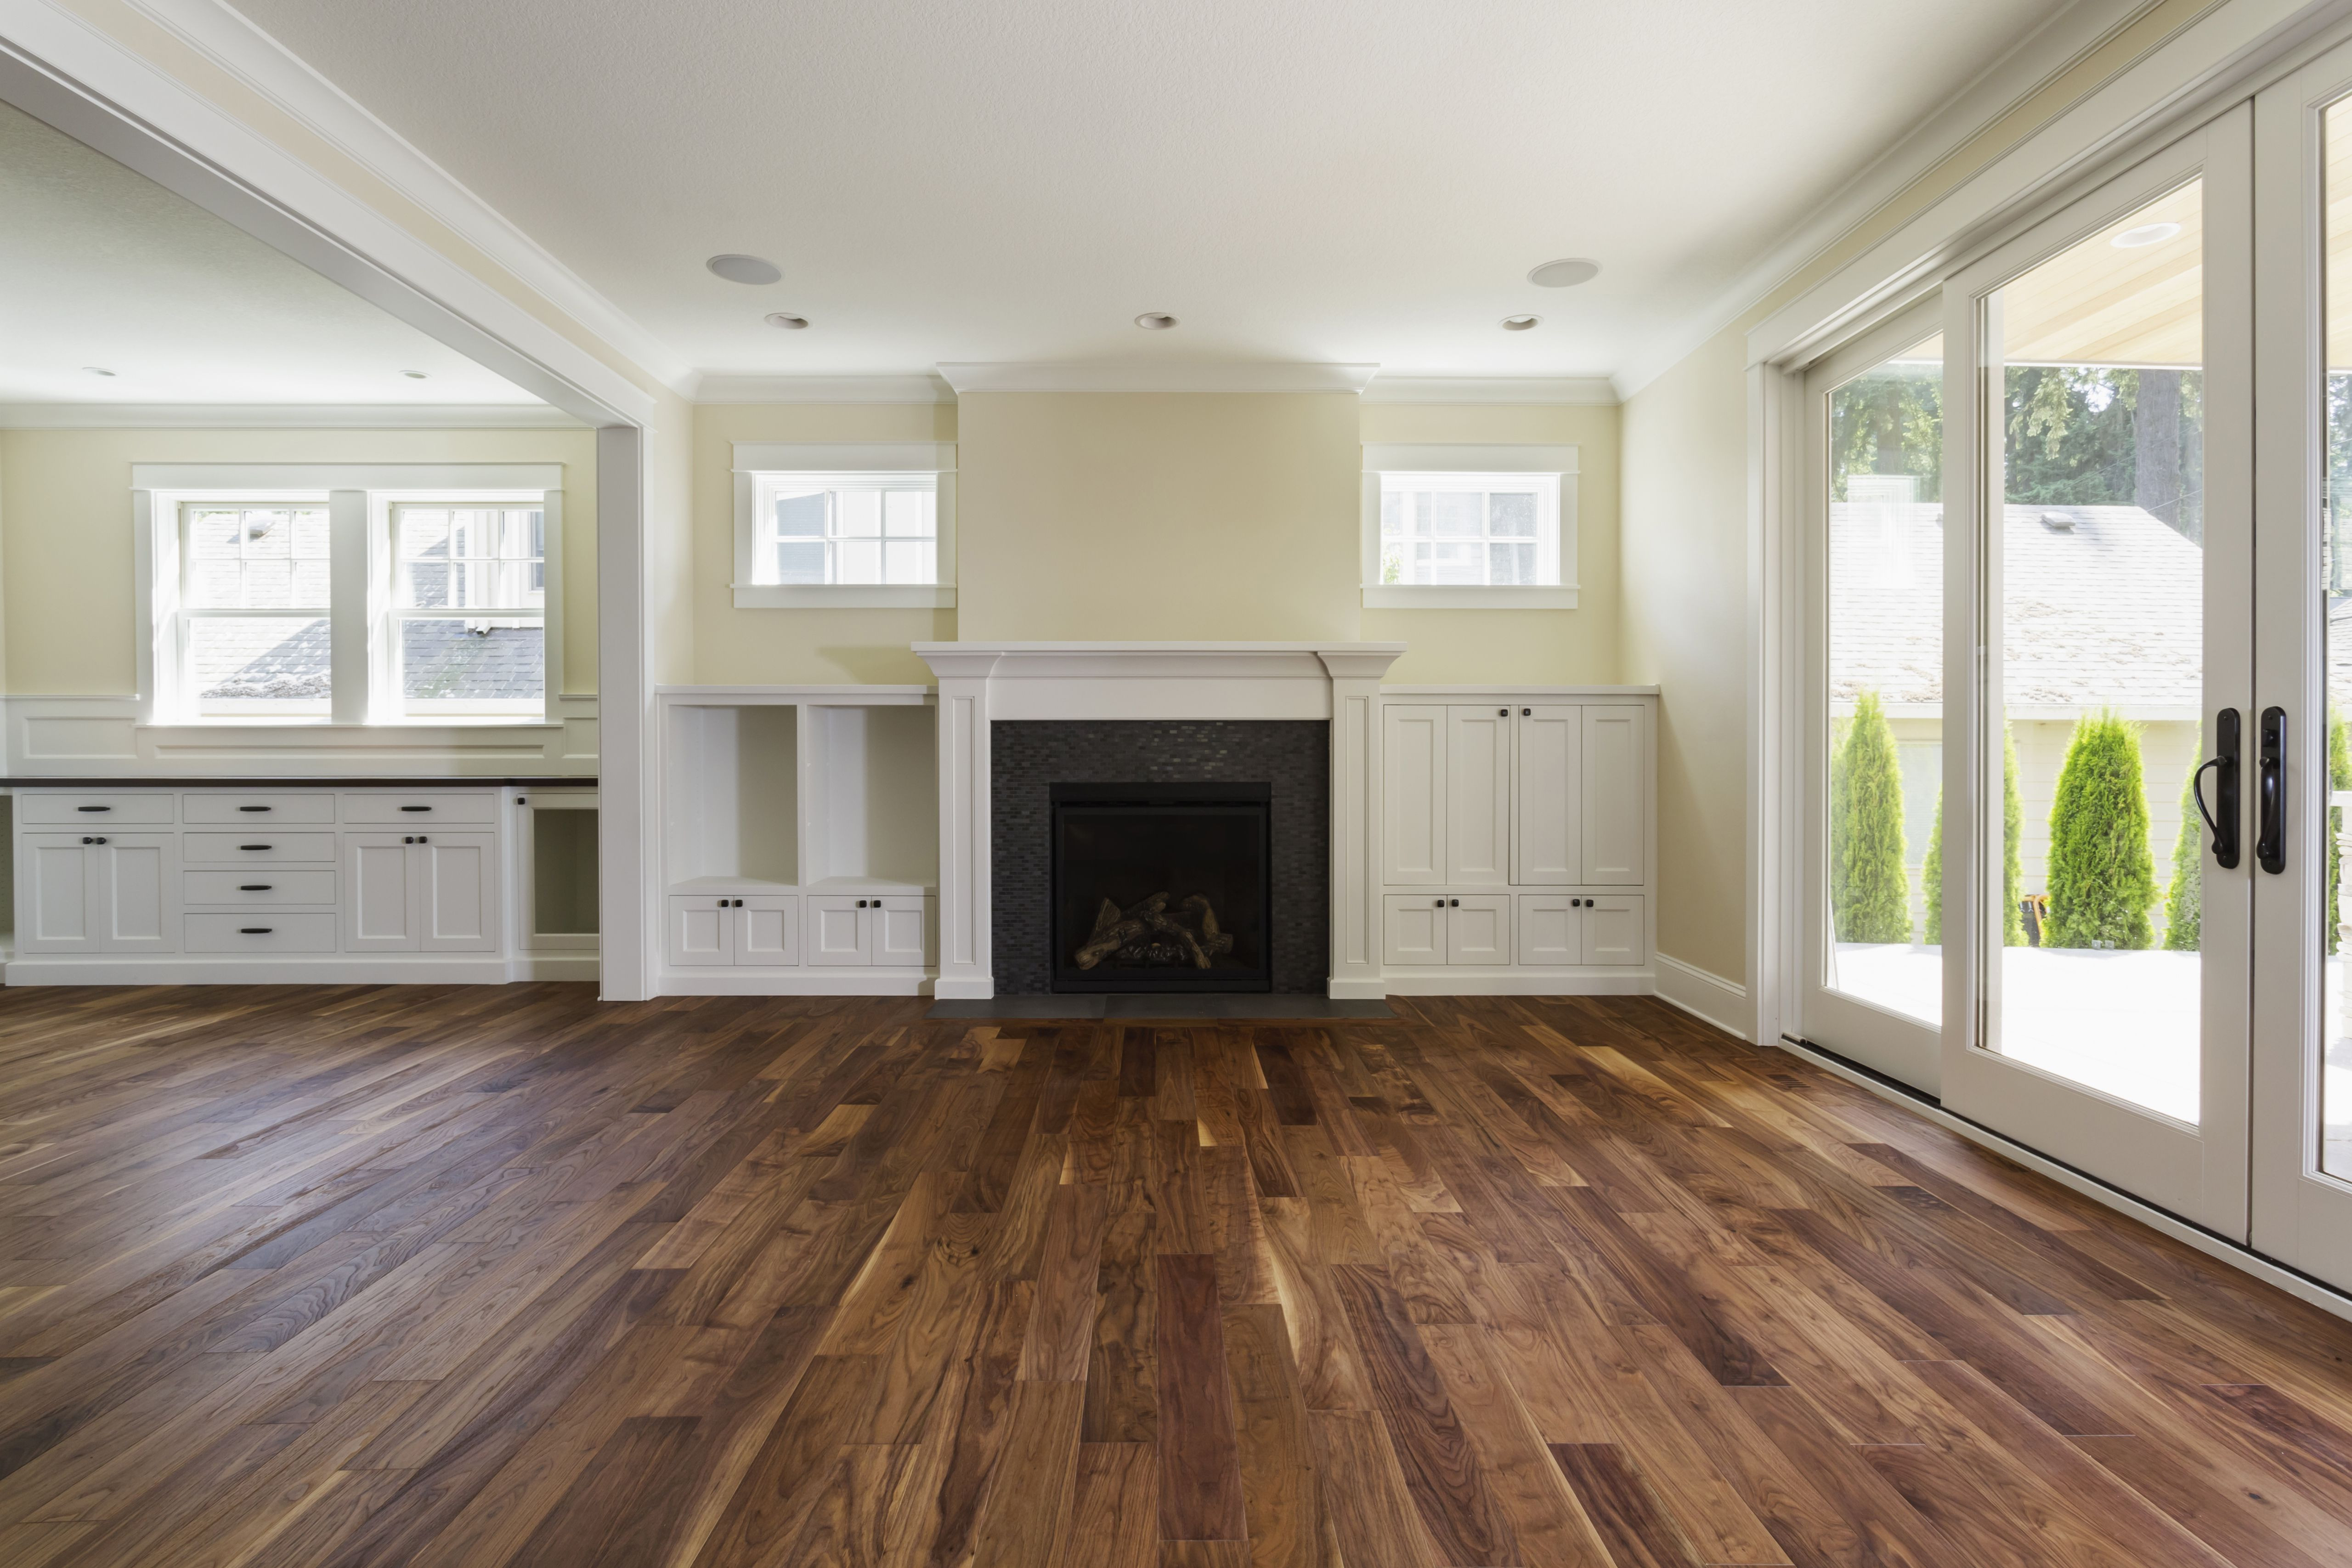 27 Famous Hardwood Floor Maintenance Coat 2024 free download hardwood floor maintenance coat of the pros and cons of prefinished hardwood flooring inside fireplace and built in shelves in living room 482143011 57bef8e33df78cc16e035397